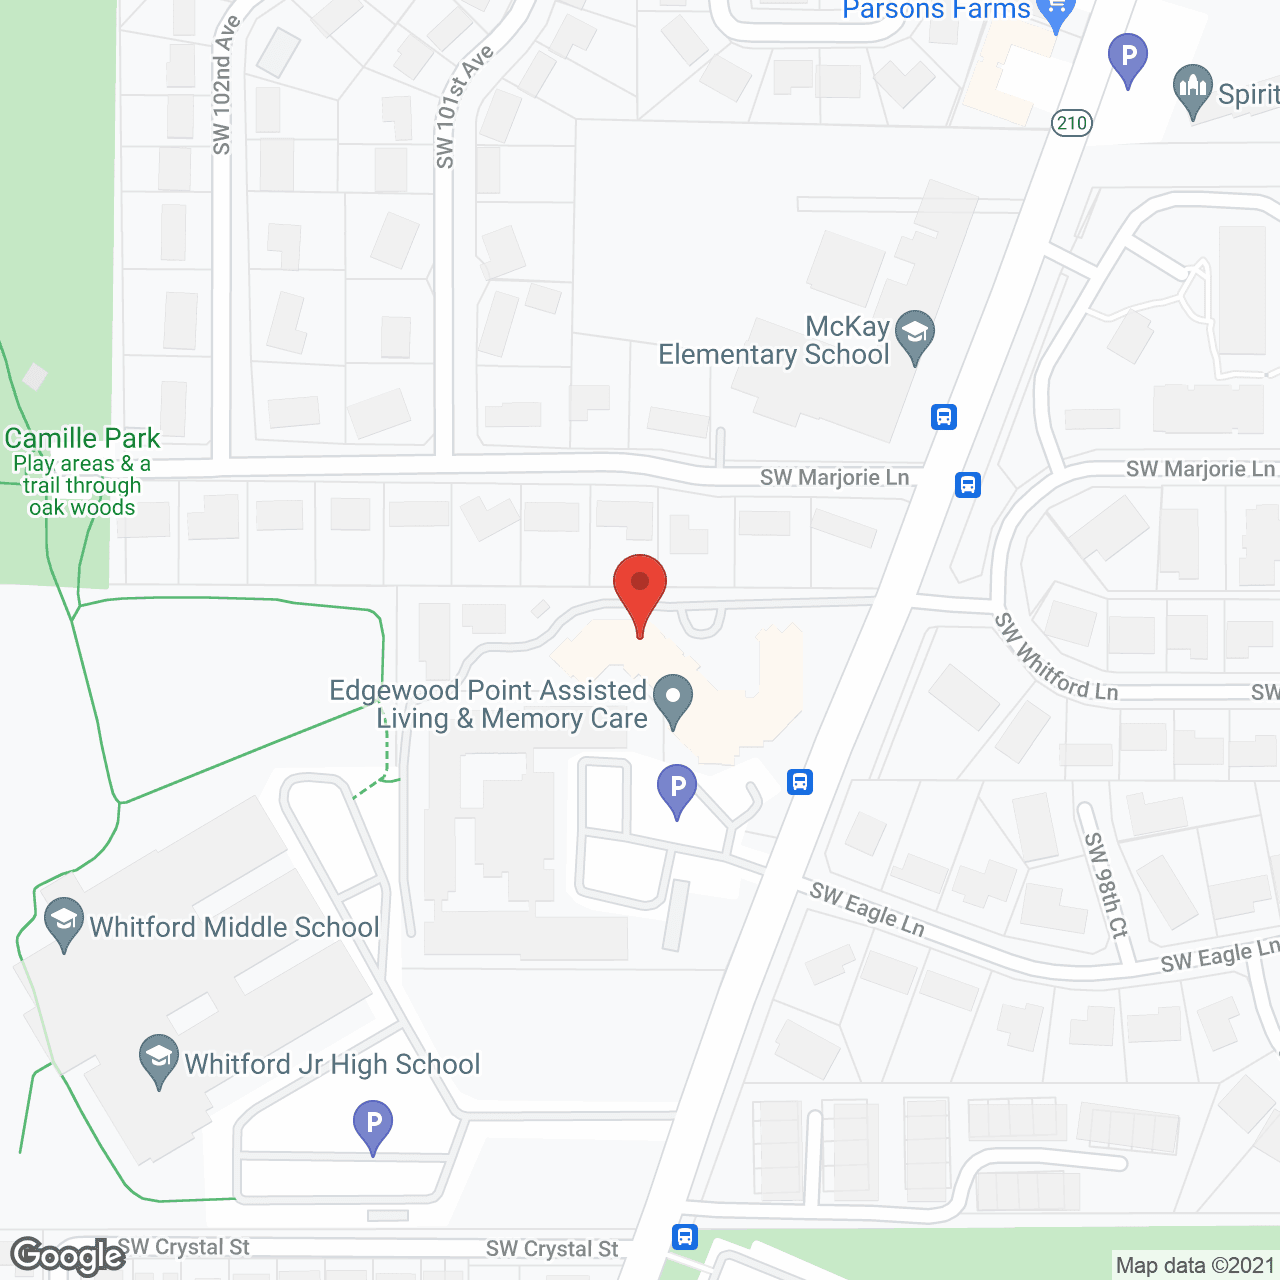 Edgewood Point Assisted Living and Memory Care in google map